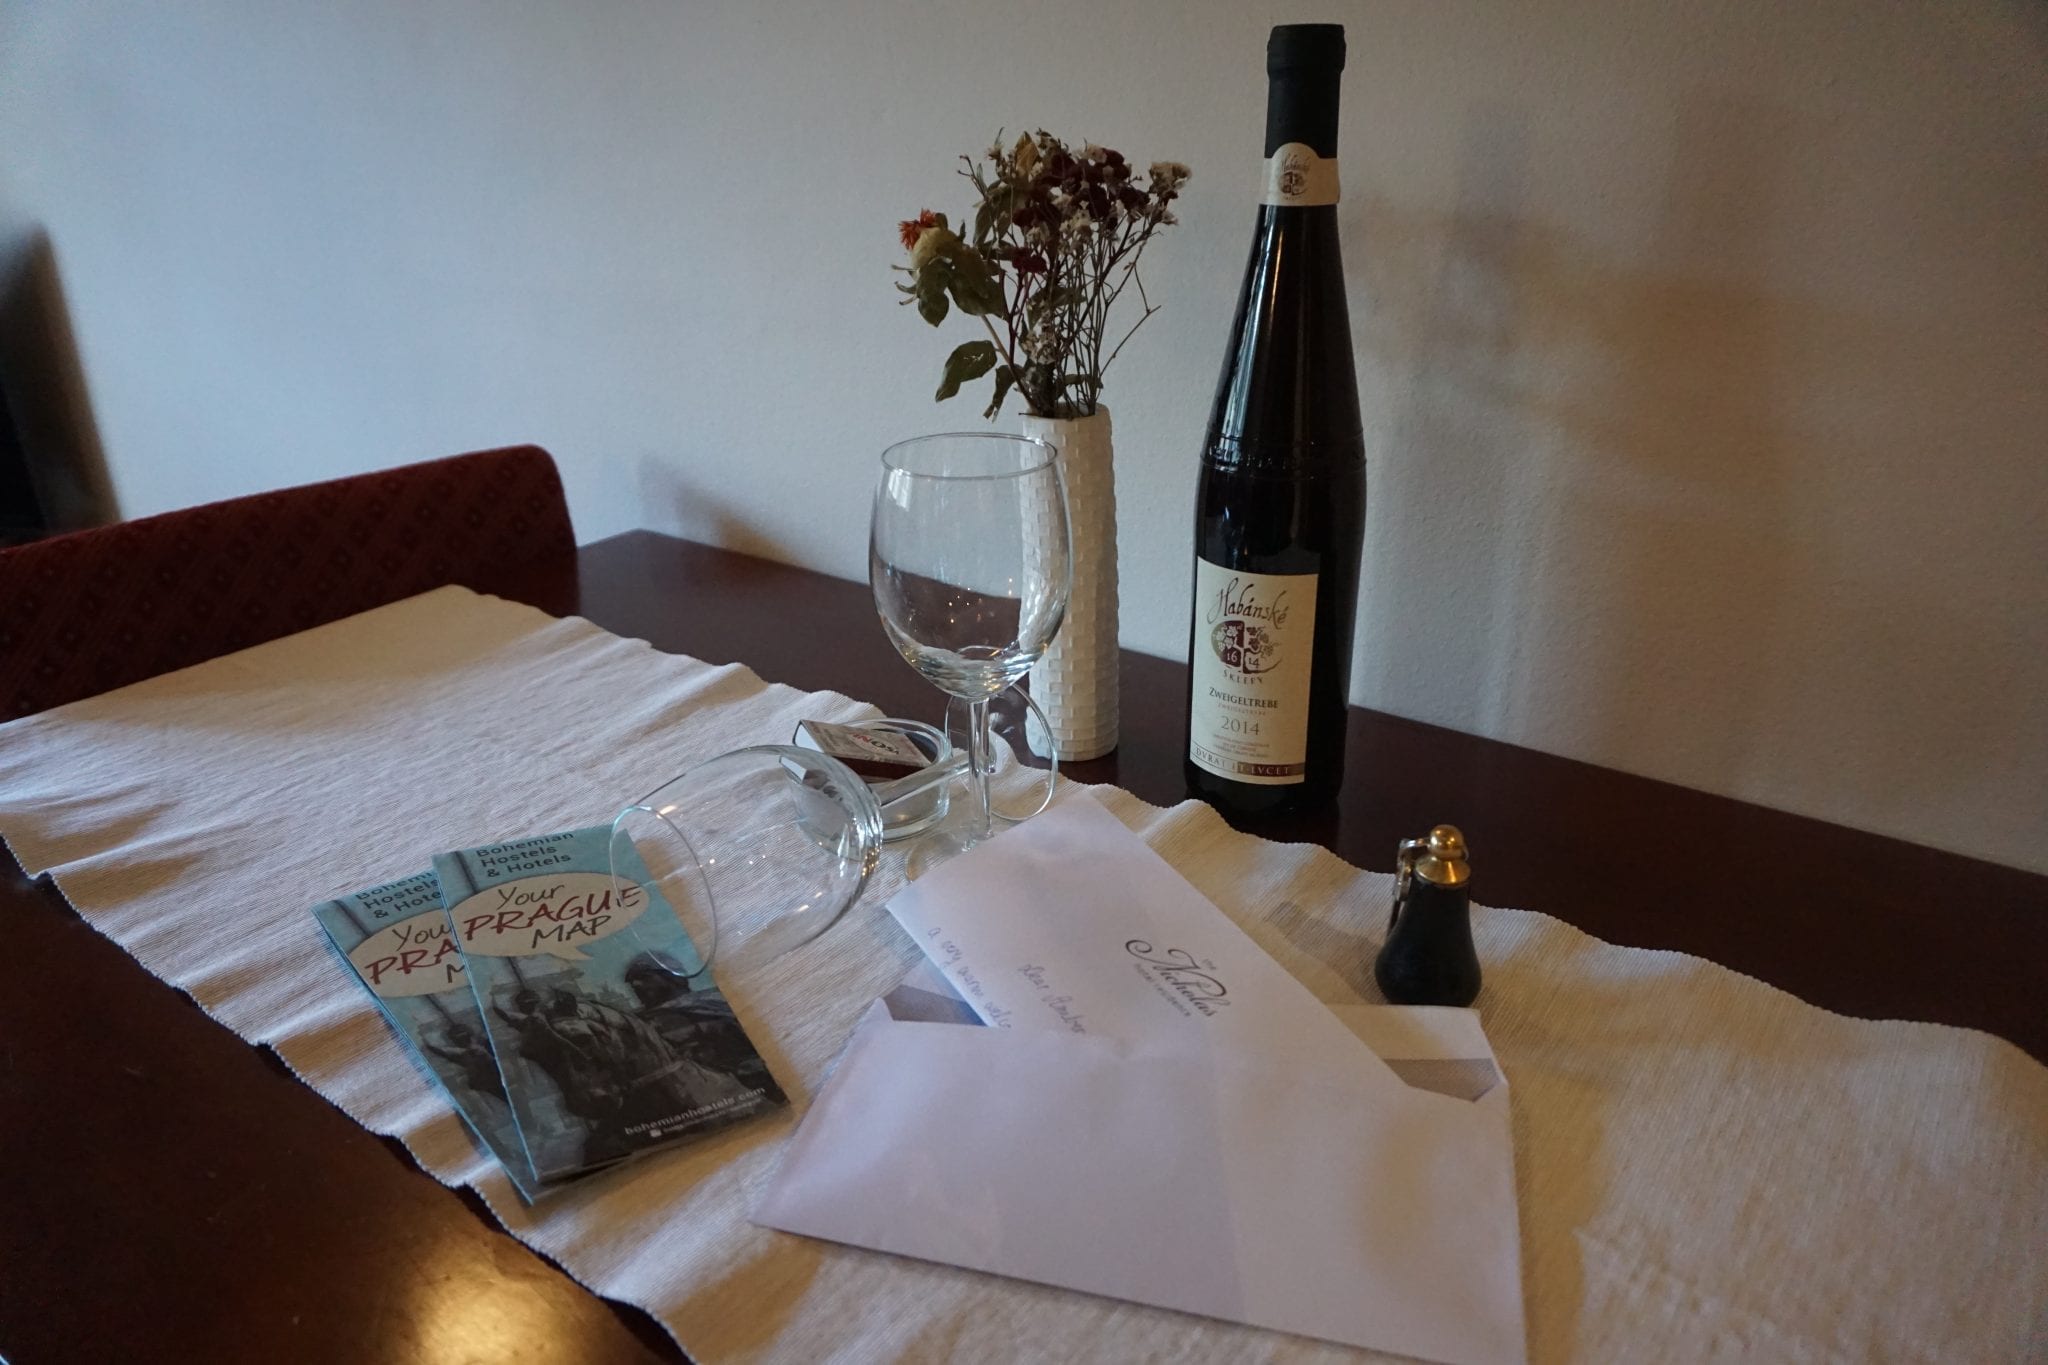 Personalized note and complimentary bottle of wine for guests at The Nicholas Hotel Residence in Prague | A review by Global Munchkins